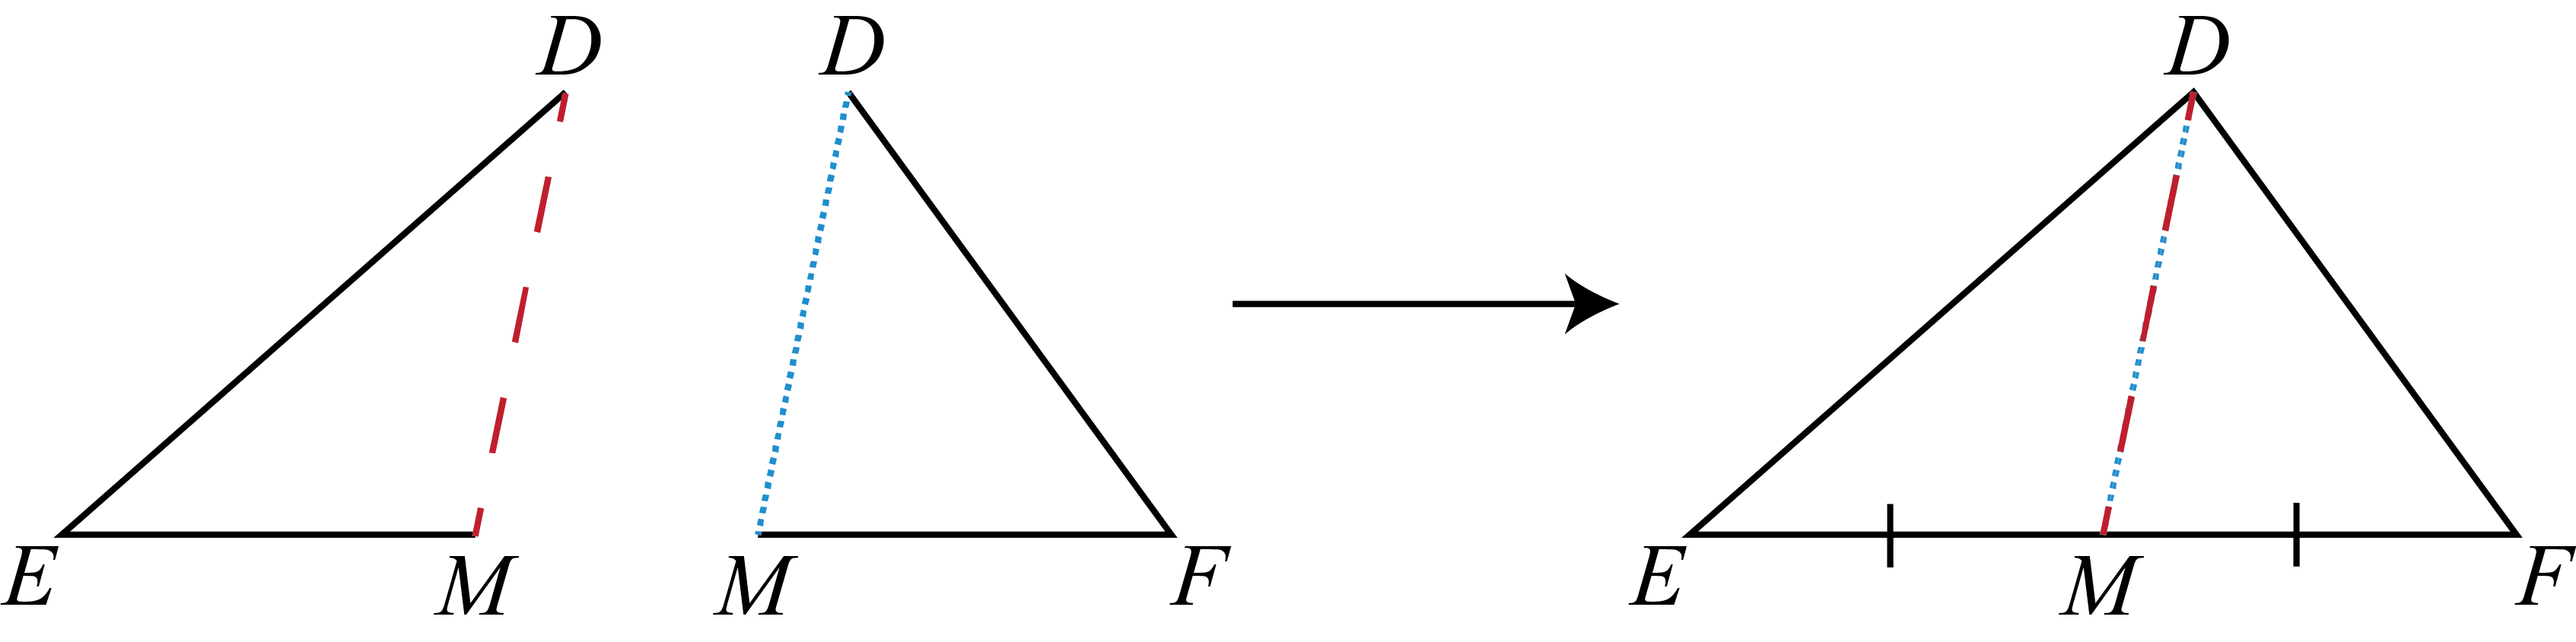 Separate triangles DEM and DFM are  joined along common side DM to form triangle DEF with point M on side EF. Point M divides EF into two segments of equal length.